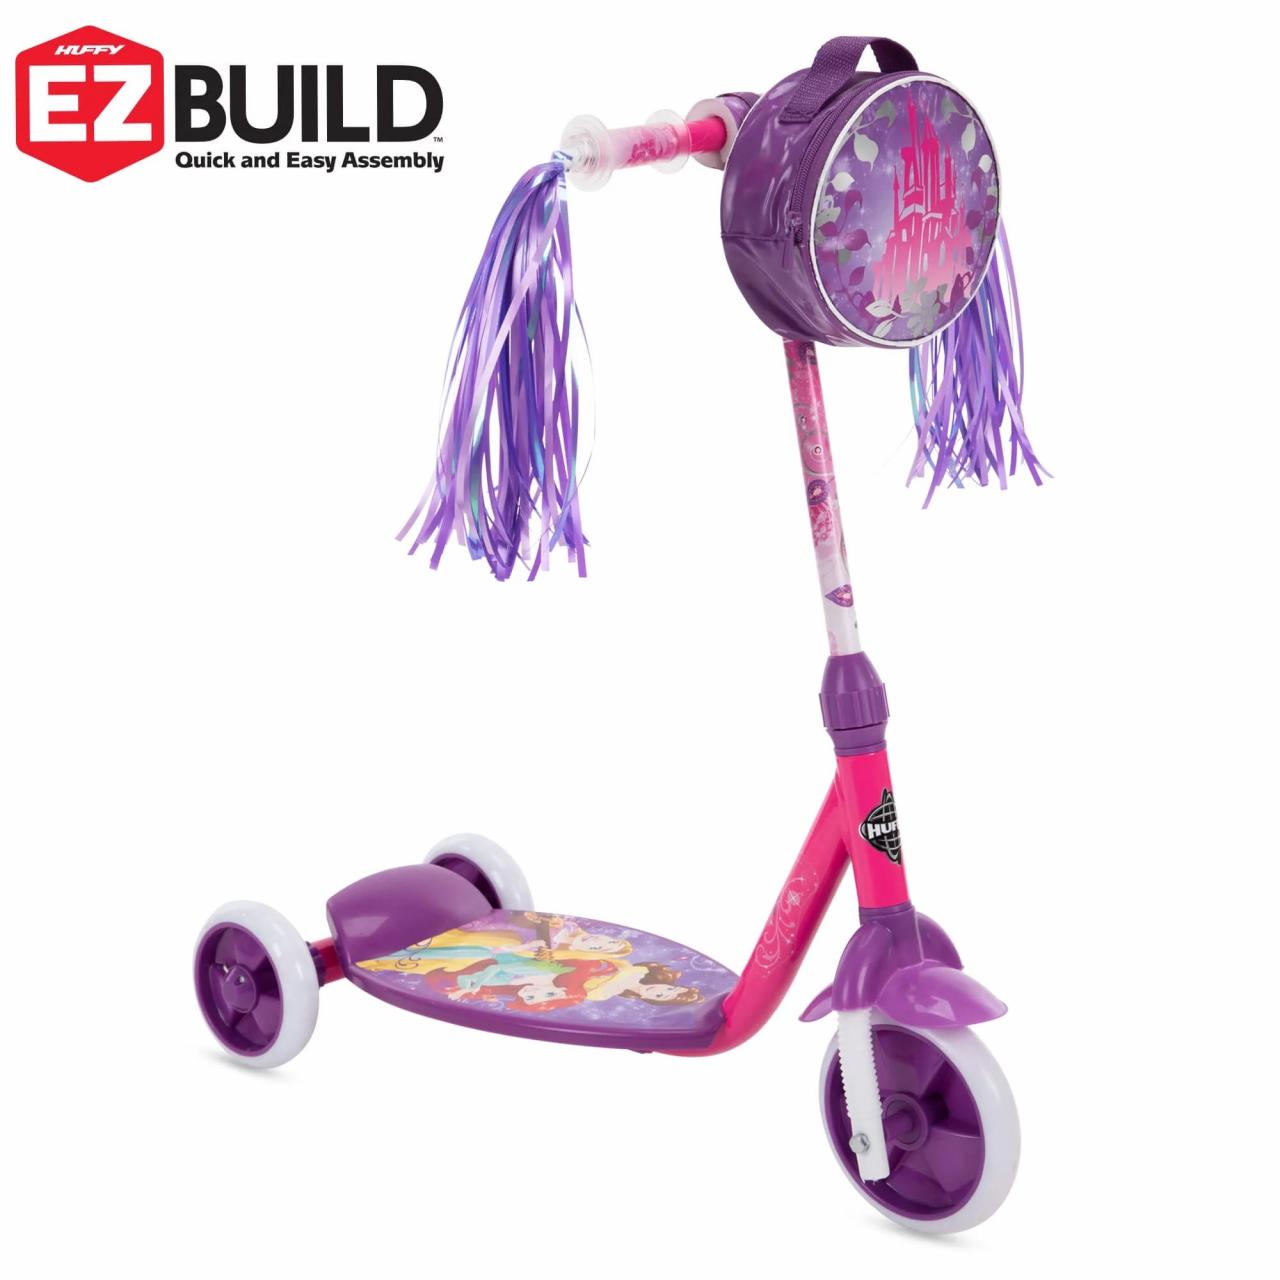 Disney Princess Girls' 3Wheel TriScooter for Kids by Huffy Walmart